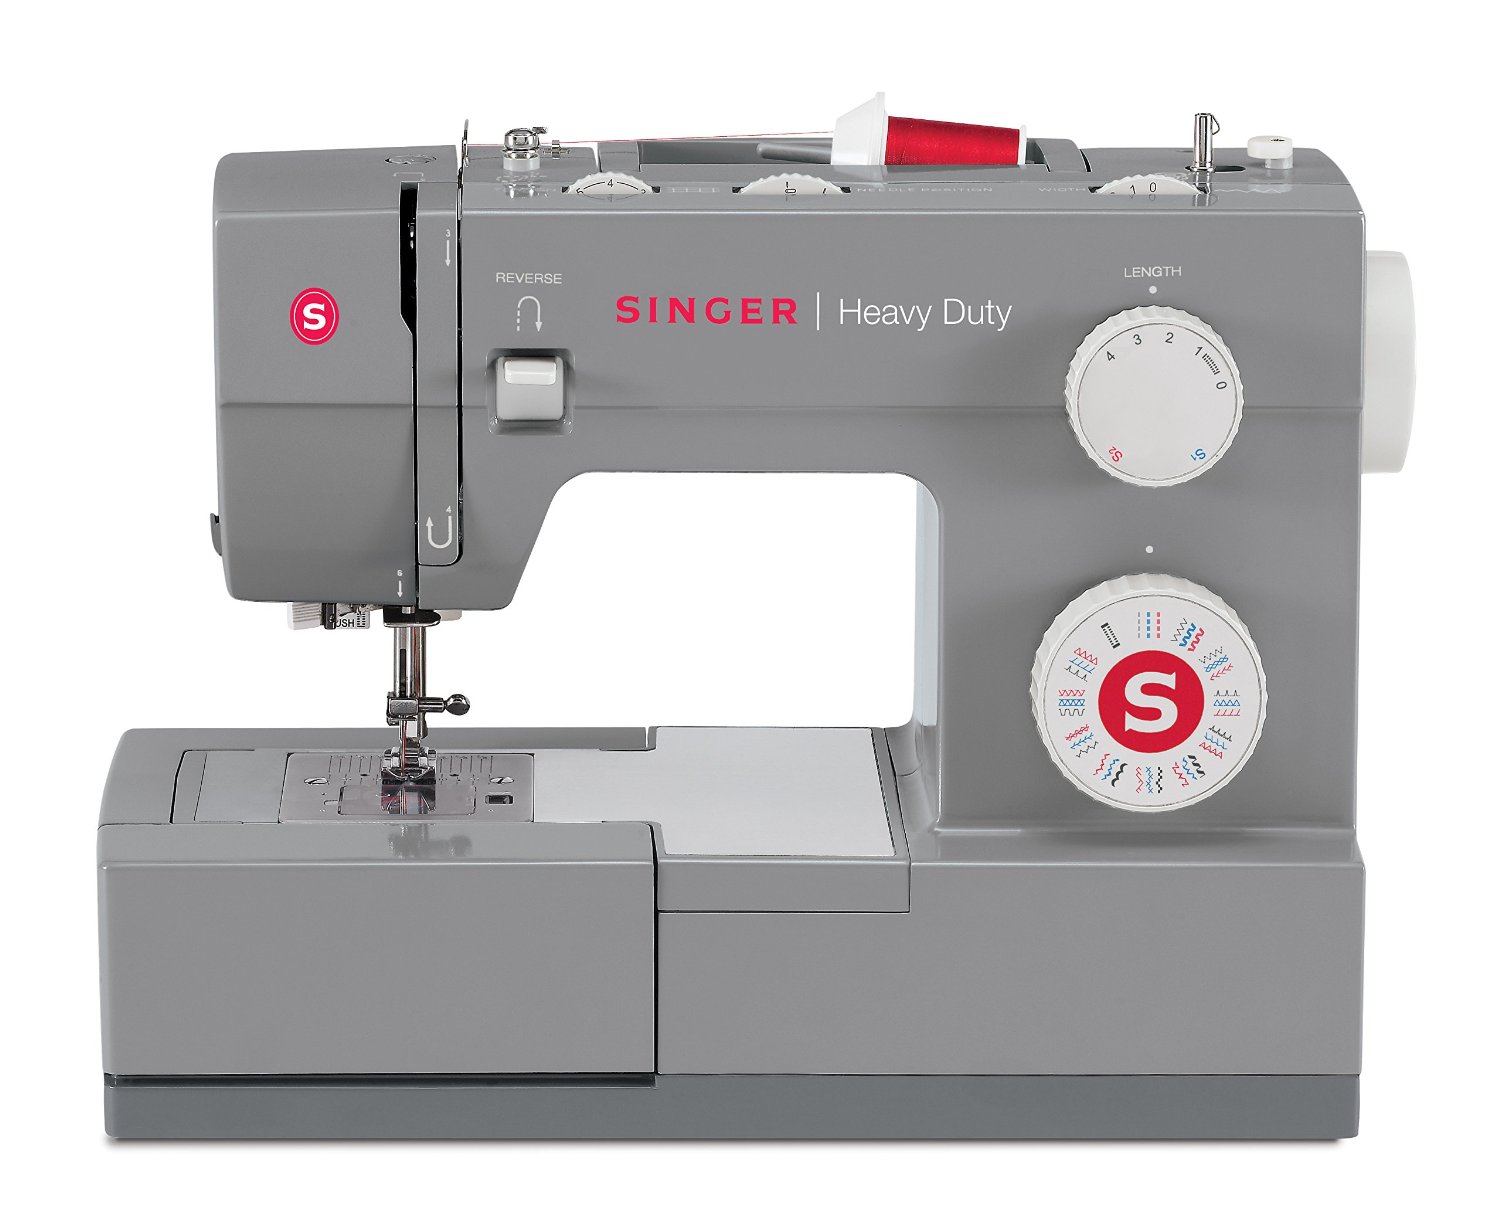 Prime Members: Save on Singer Heavy Duty Sewing Machine – Just $124.99!